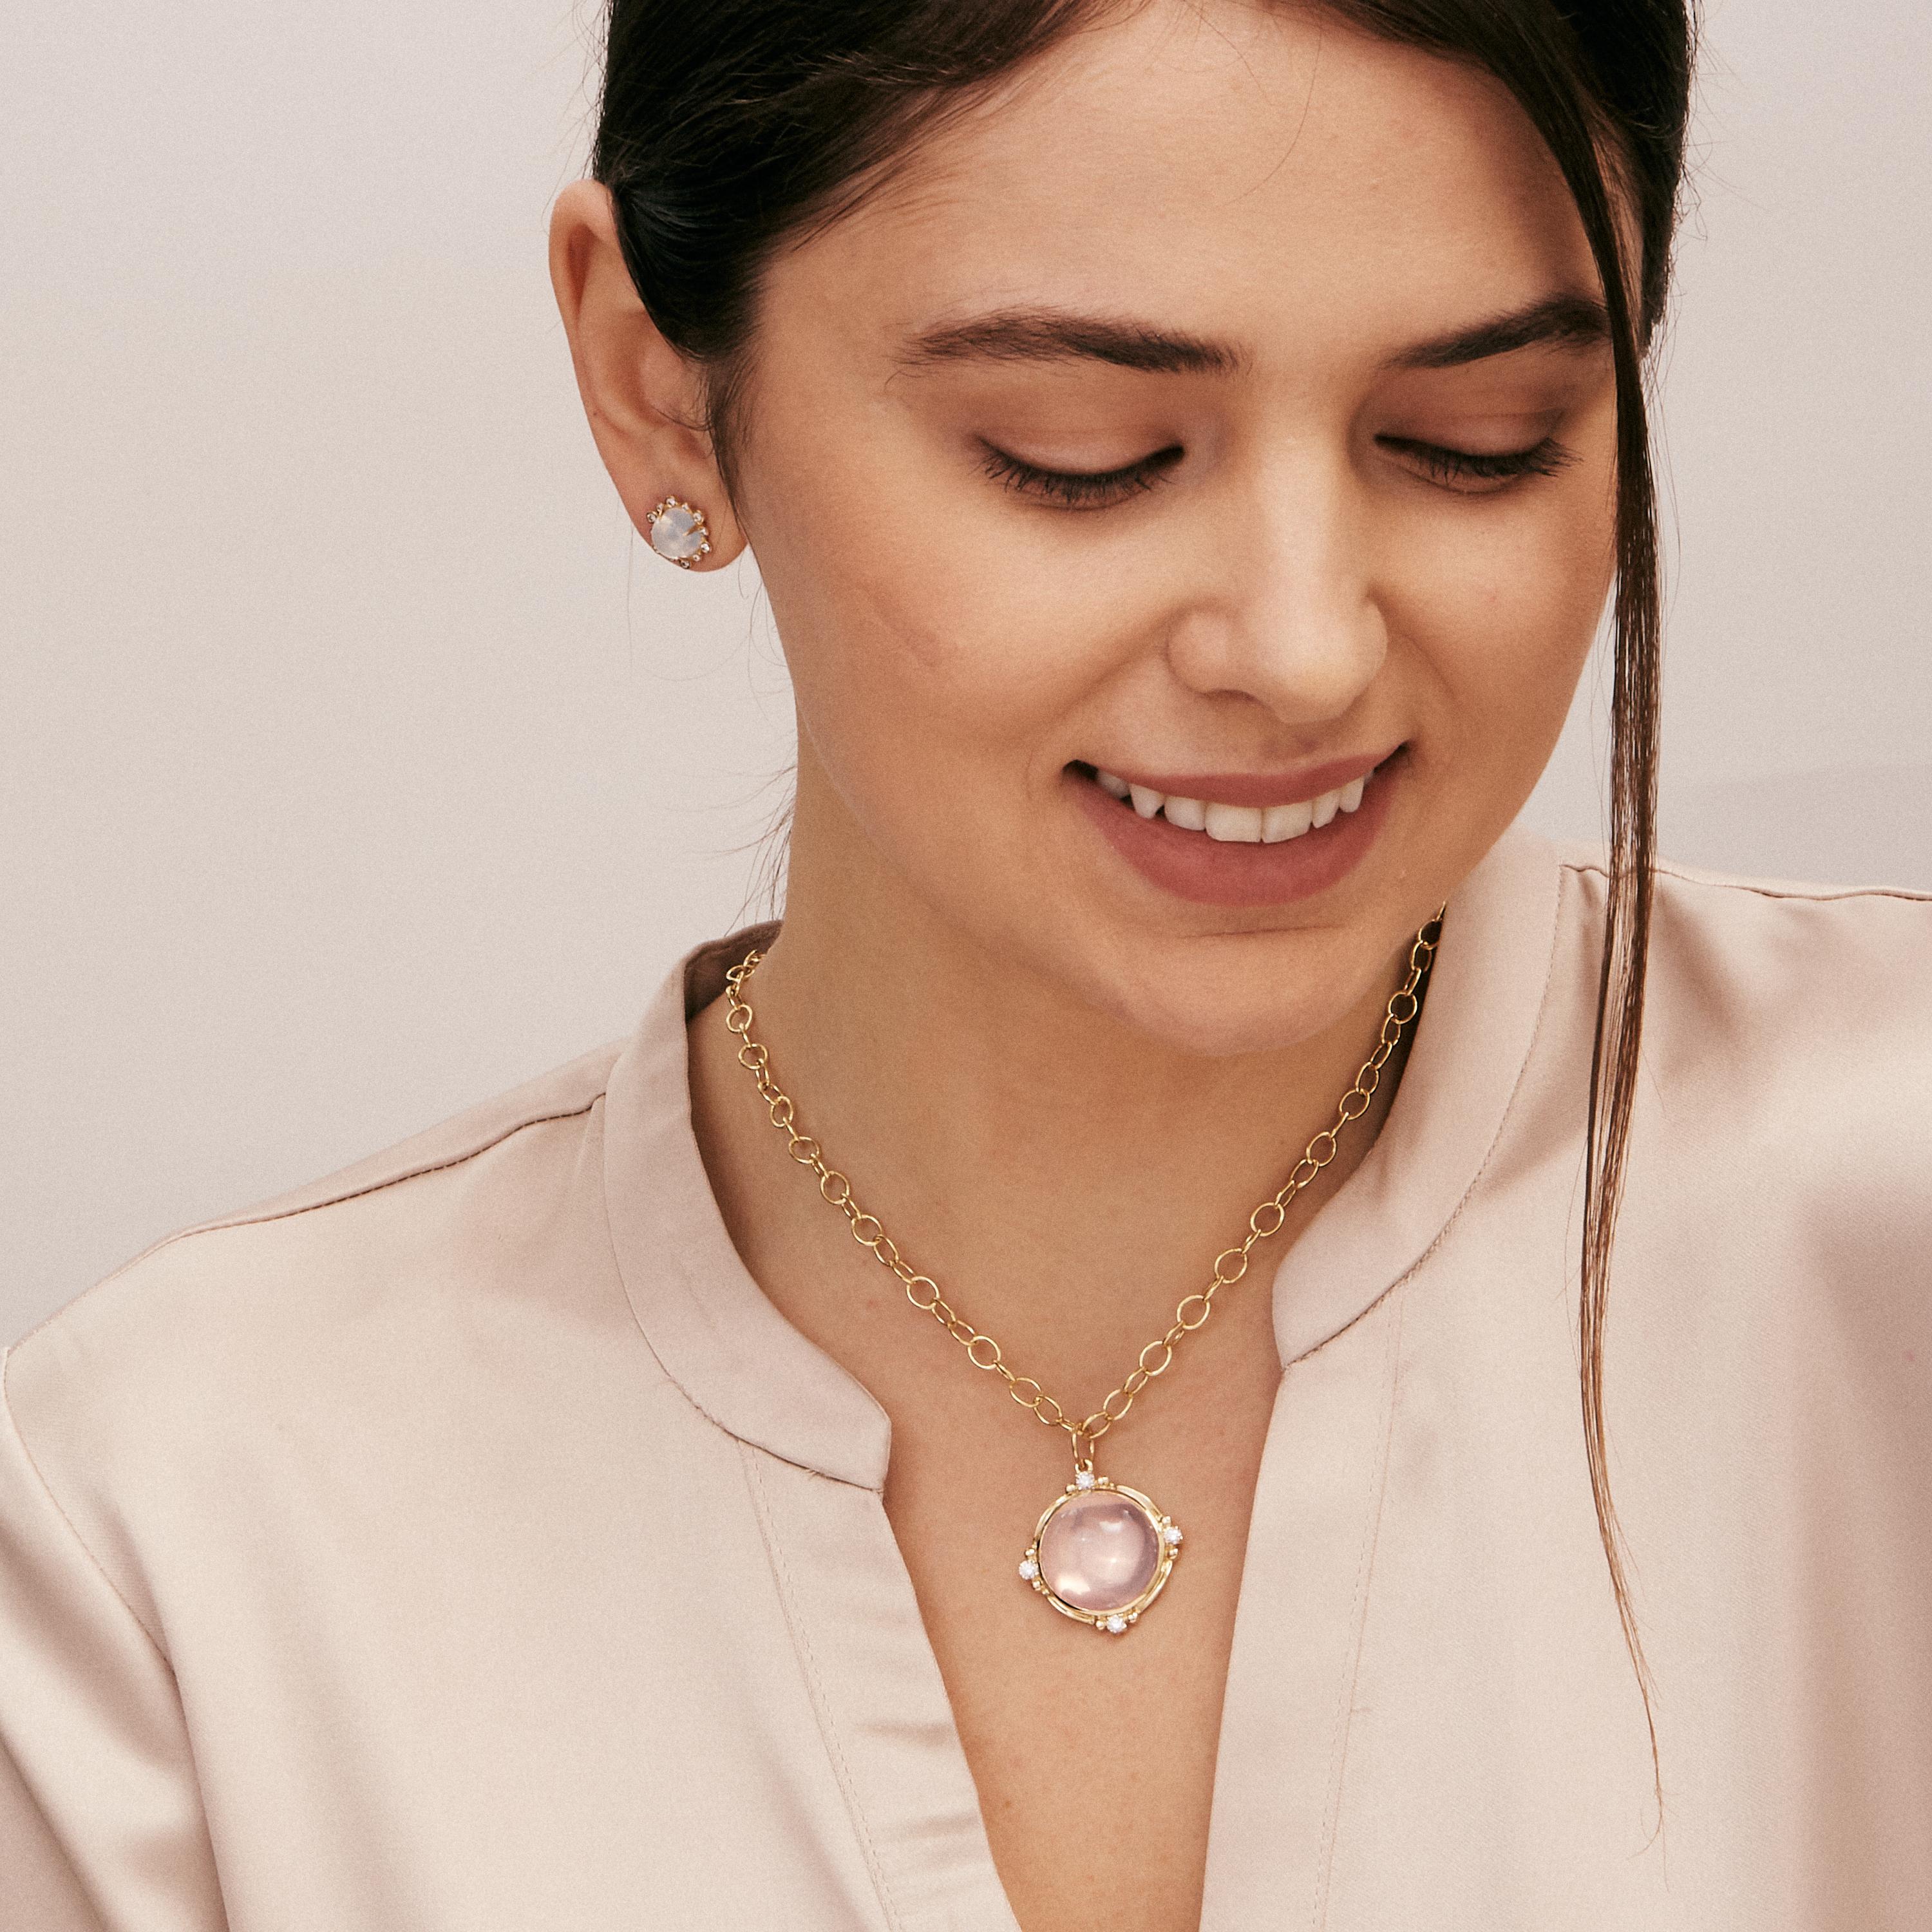 Created in 18kyg
Rose quartz 25 carats approx.
Champagne diamonds 0.35 carat approx.
Chain sold separately 
Limited edition

Framed in stunning 18 karat yellow gold, this limited edition, handcrafted pendant showcases an impressive 25 carat rose